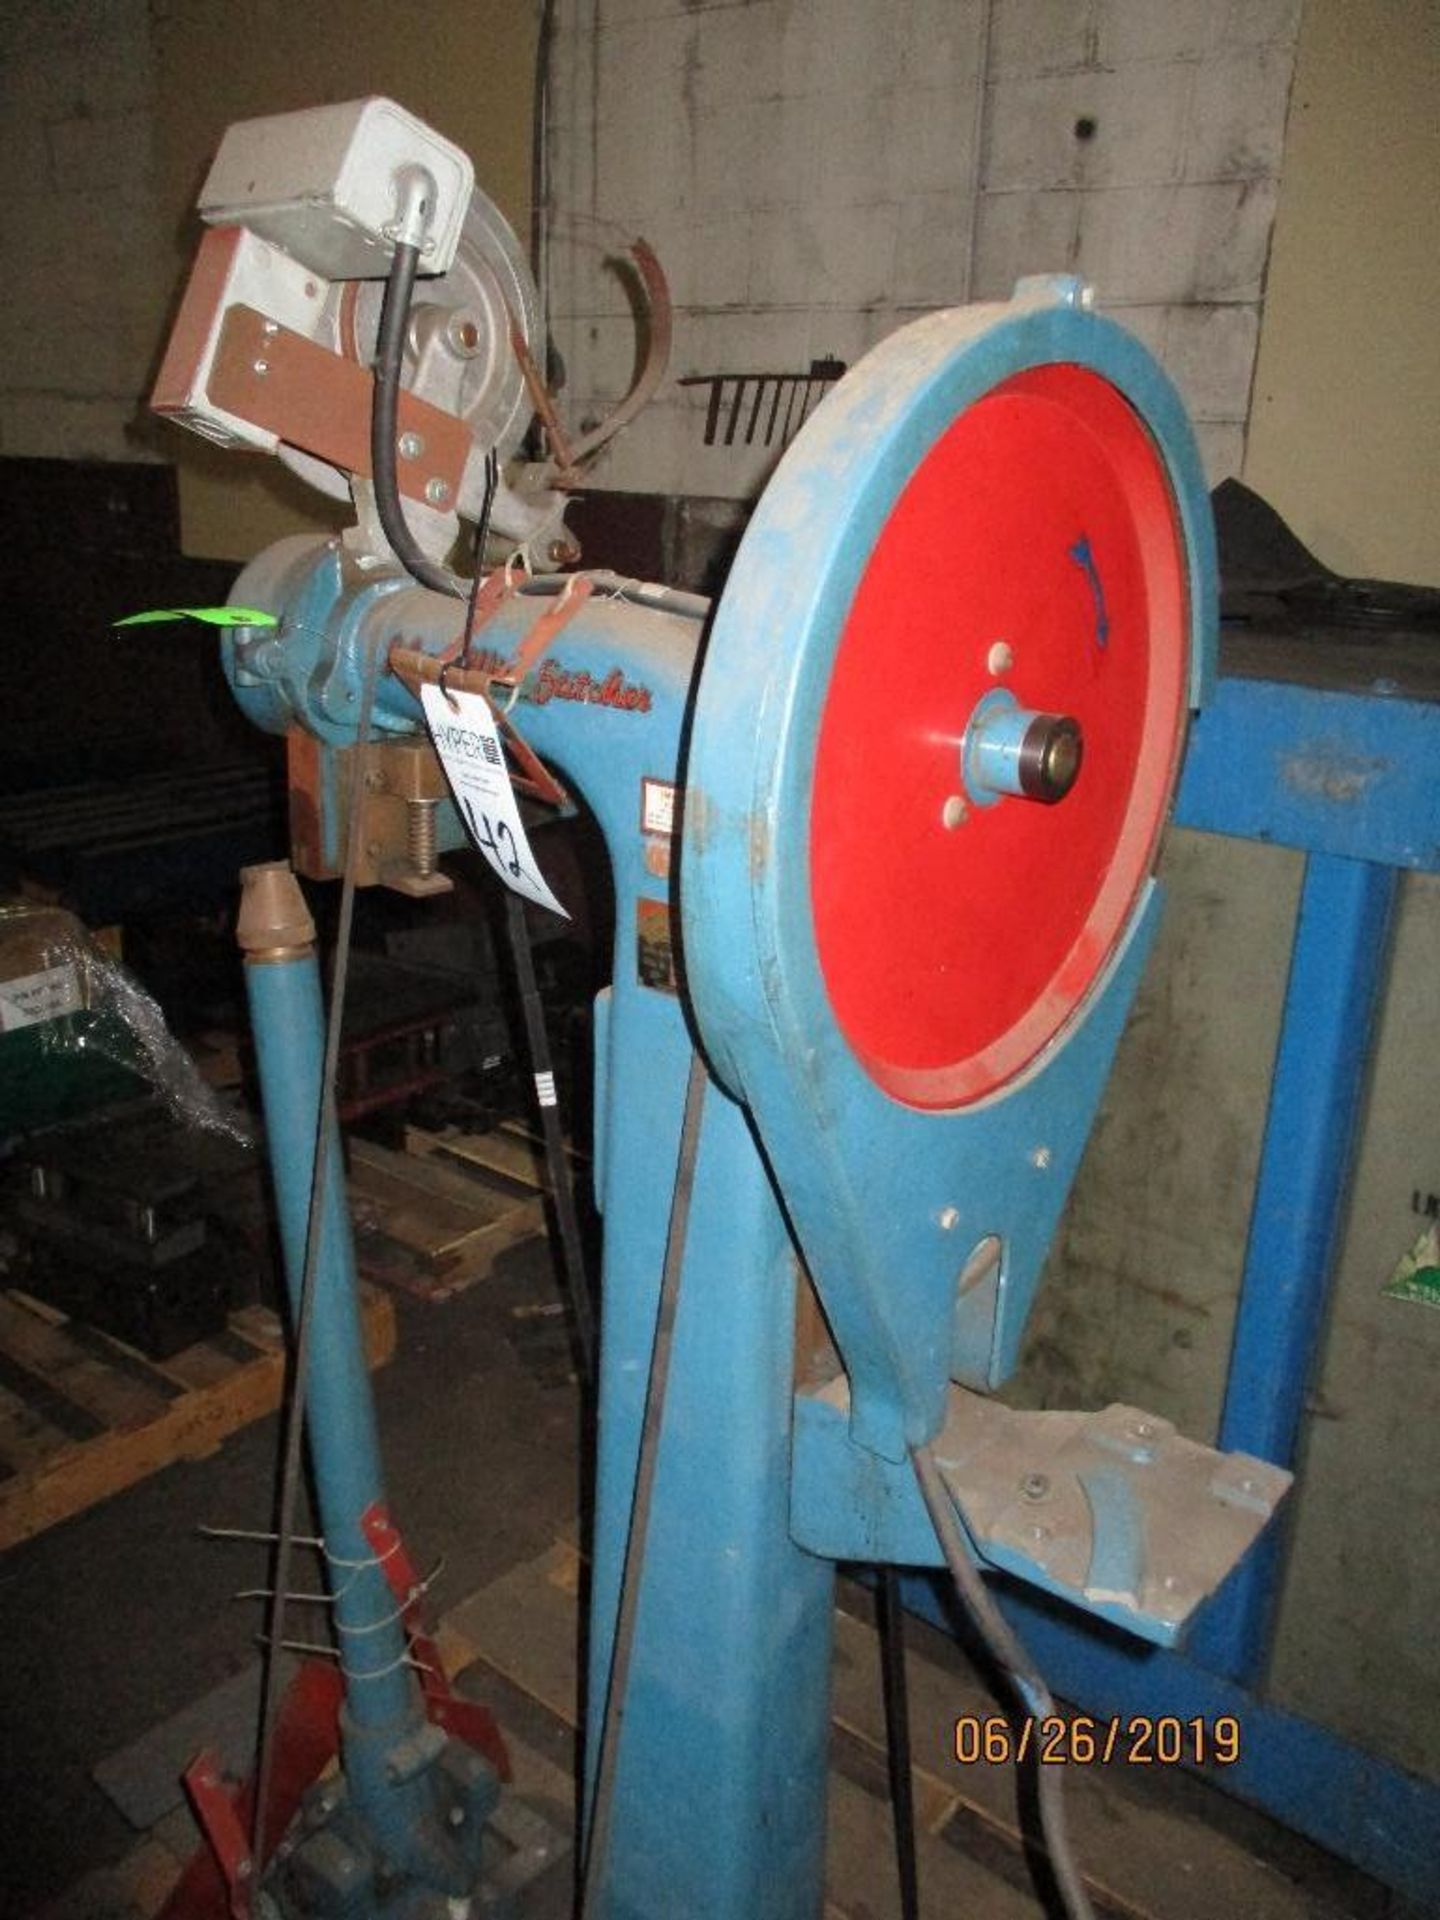 Ideal Stitcher Machine M/N IB-1240 S/N A-25546, Missing Motor, Located at 800 West Broadway St. Thre - Image 3 of 3